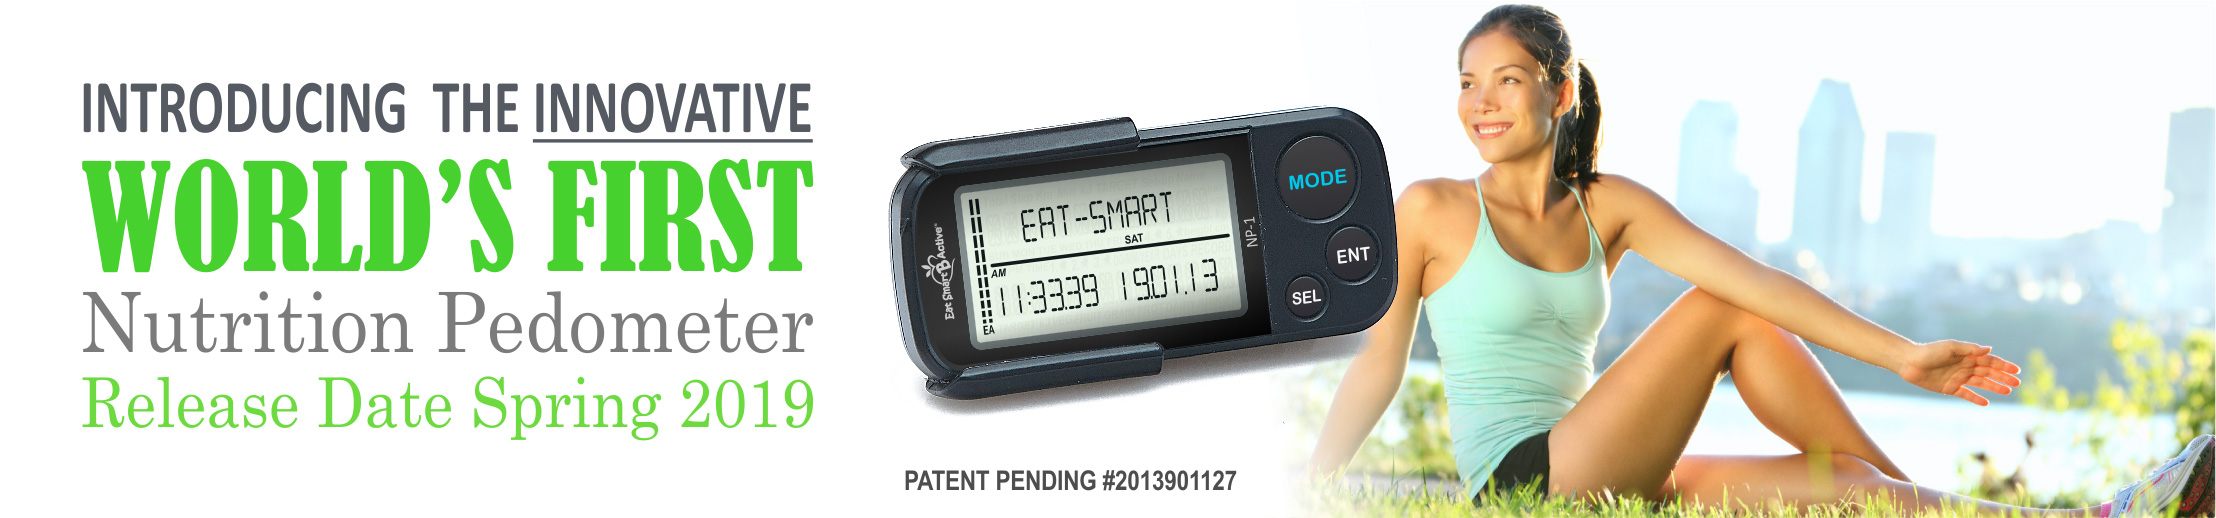 NP1 - The Worlds First Nutrition Pedometer